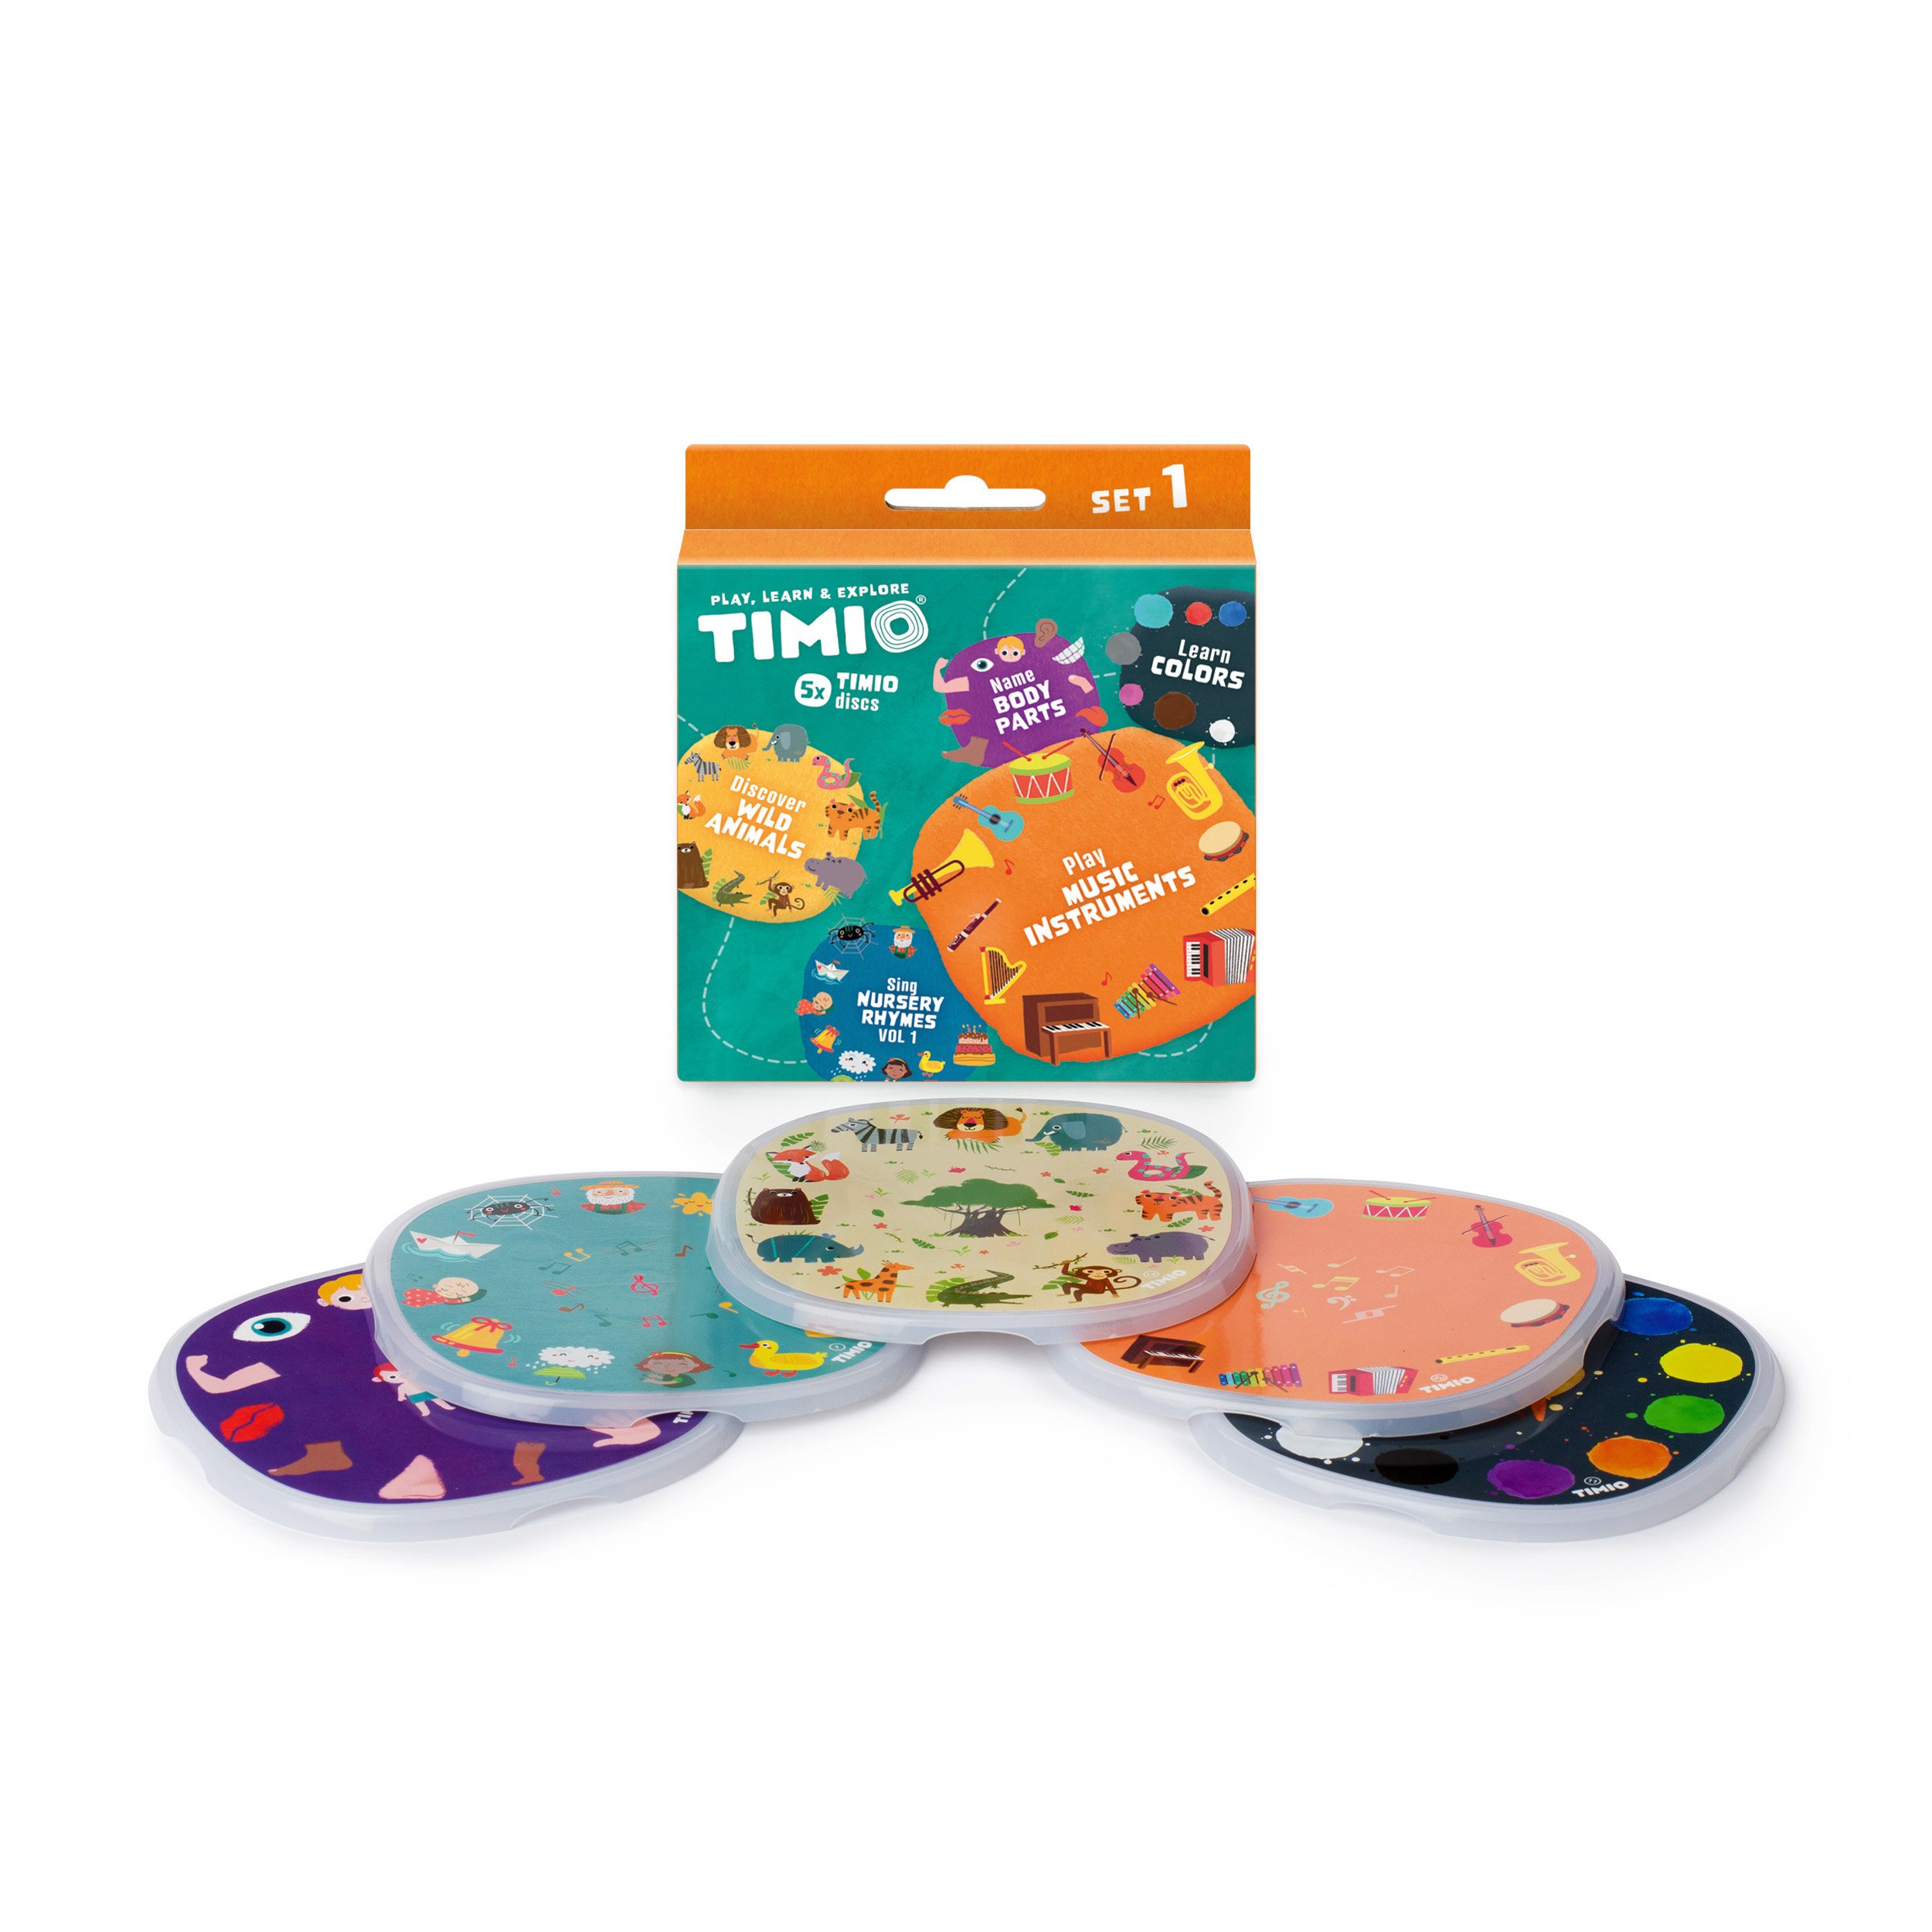 Timio - Disc Set 1 - Wild Animals, Nursery Rhymes, Colours, Musical and Body Parts - (TM-TMD-01E) - Leker